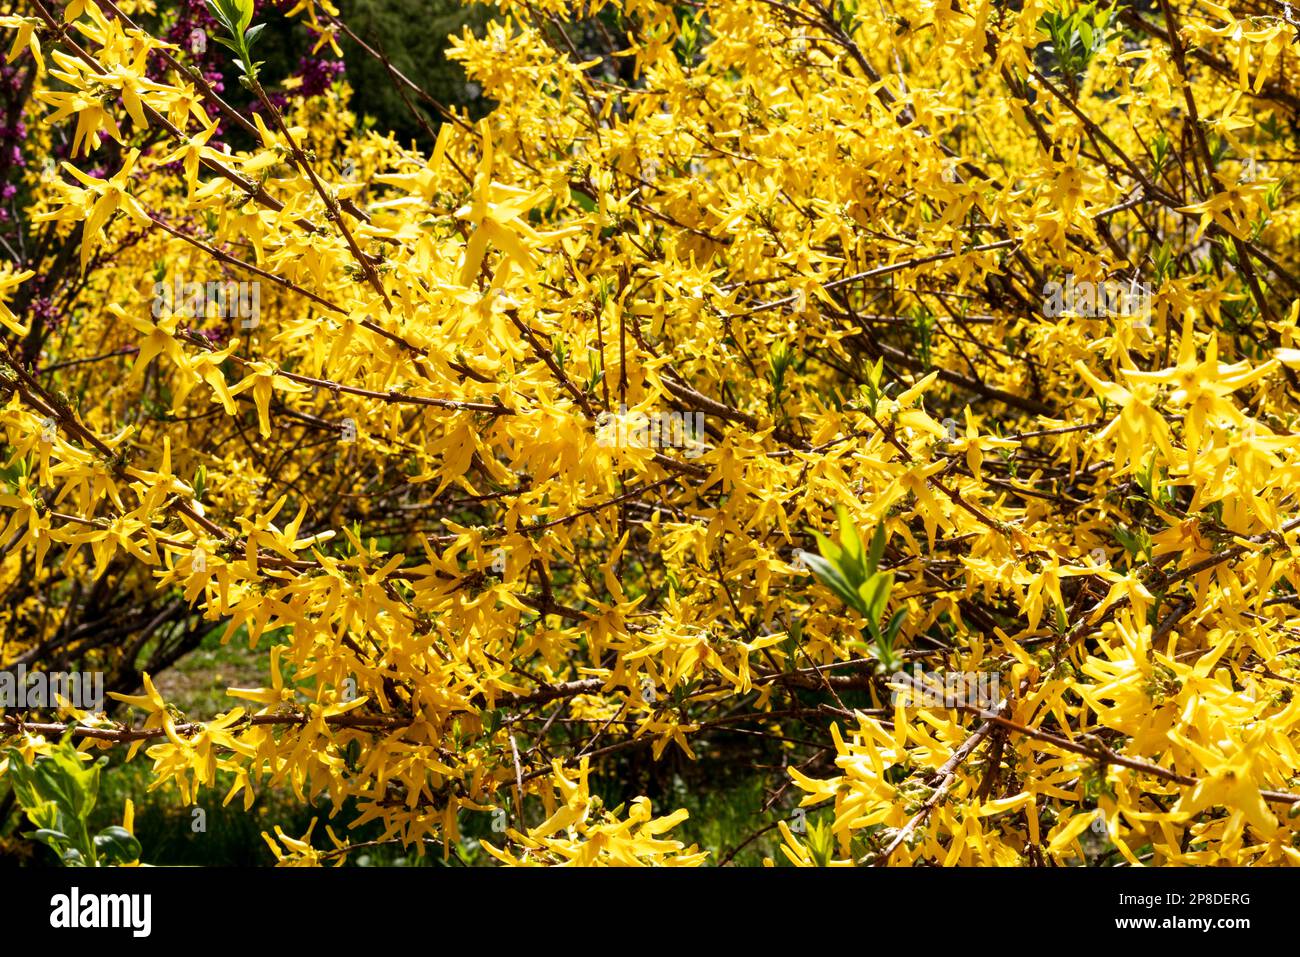 spring or summer landscape flowering plant with yellow forsythia flowers close-up in park beauty in nature landscaping and gardening Stock Photo